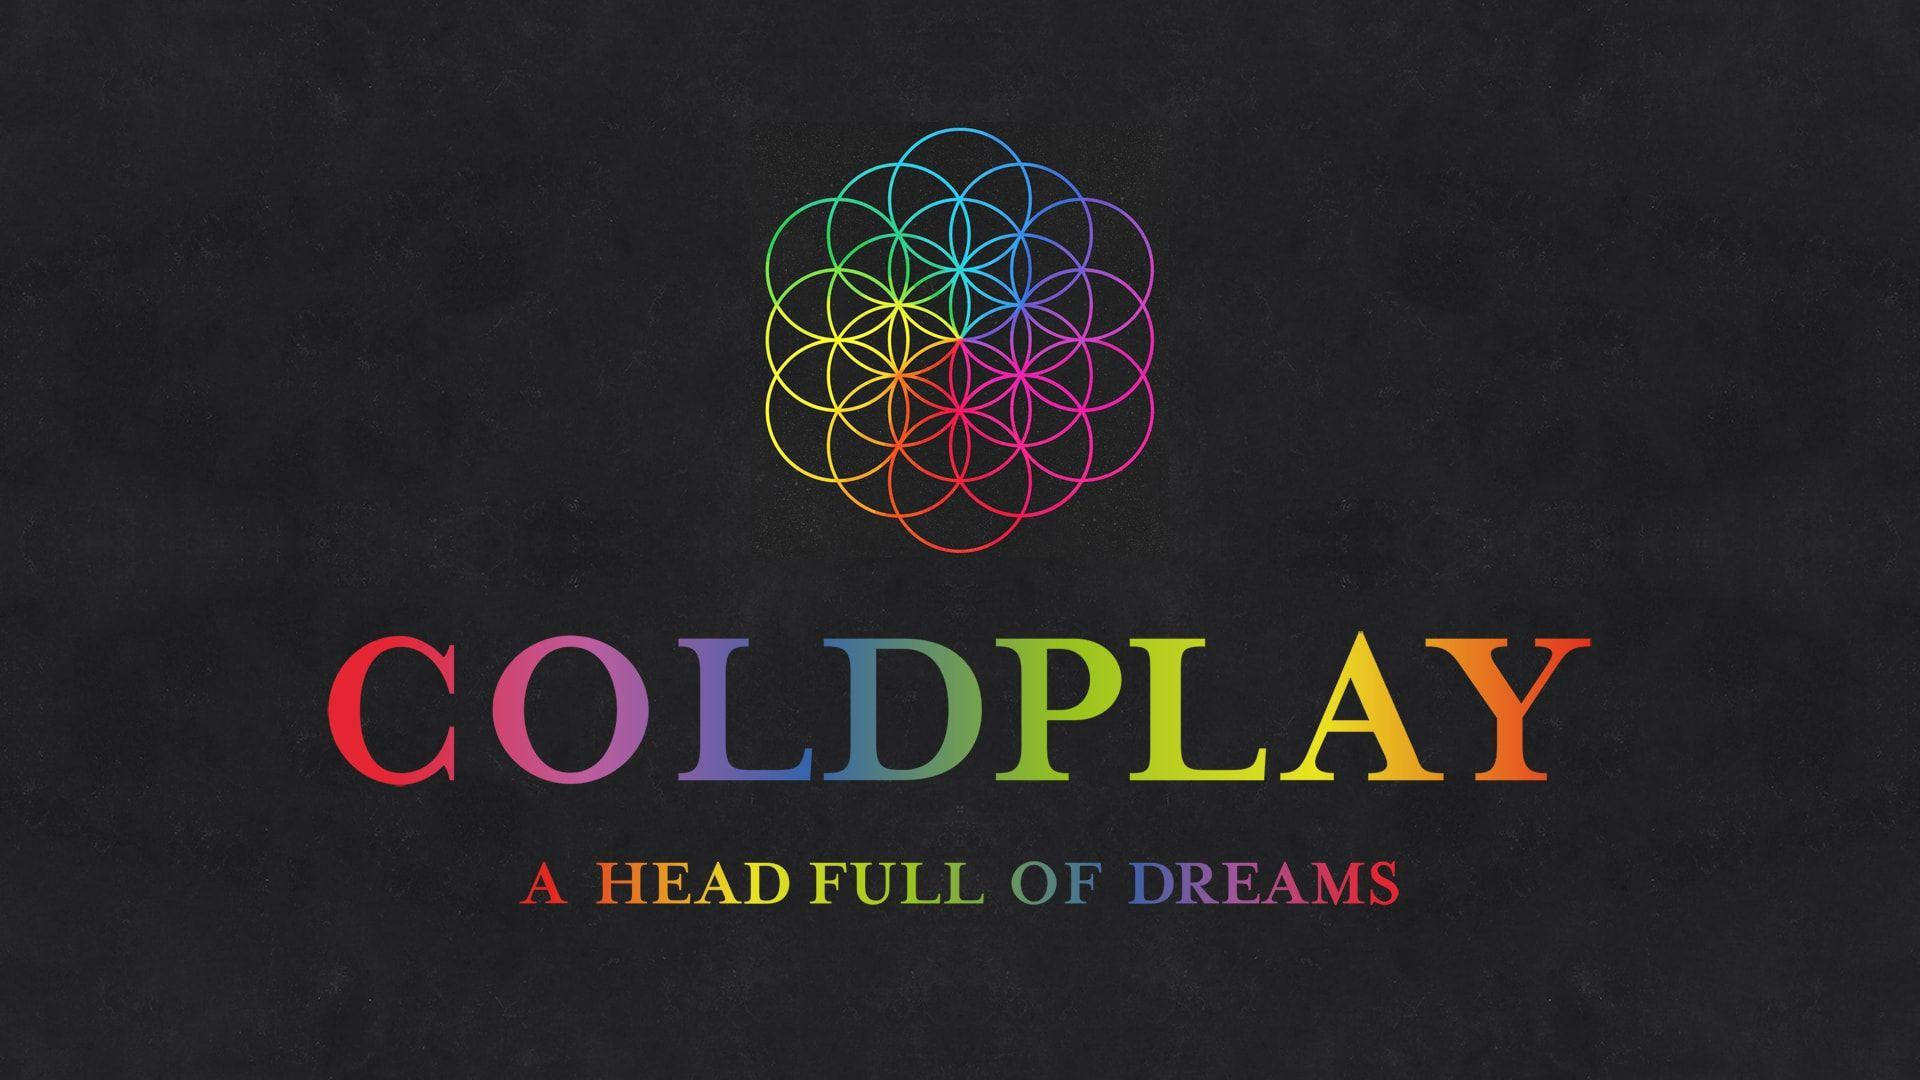 Coldplay Background